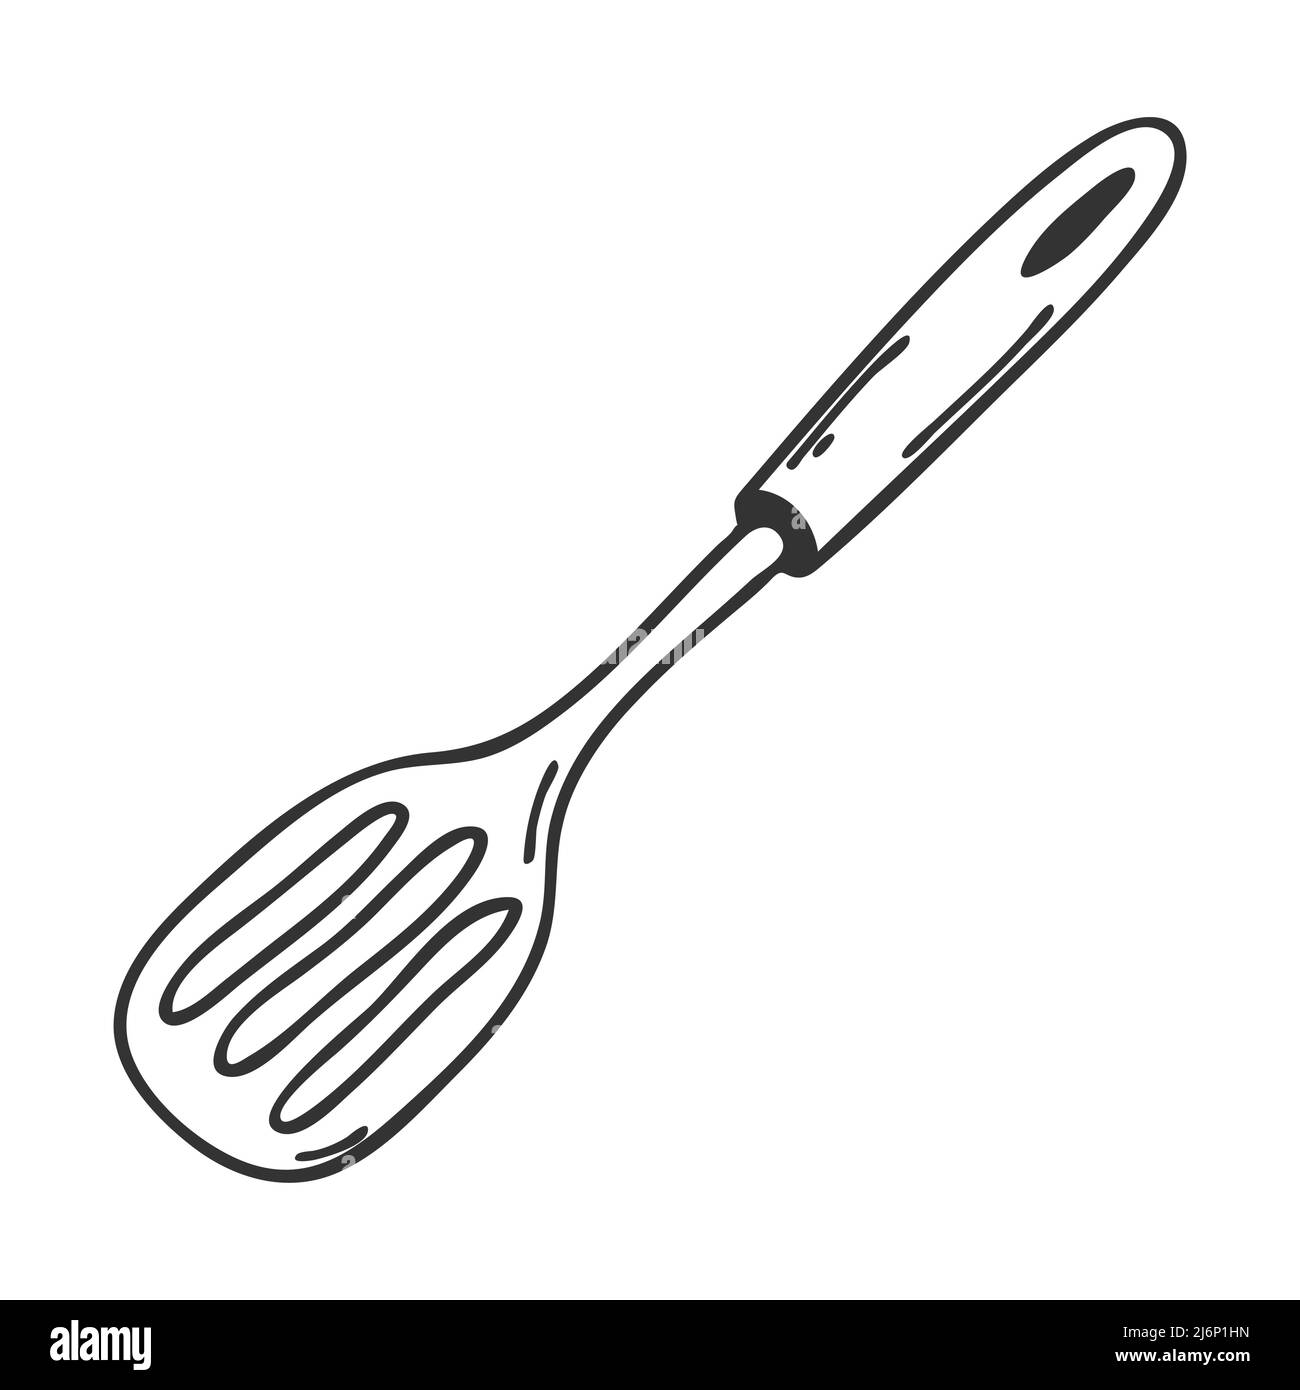 https://c8.alamy.com/comp/2J6P1HN/culinary-scoop-tableware-kitchen-accessories-cooking-utensils-design-element-for-menu-design-recipes-and-food-packaging-hand-drawn-and-isolated-2J6P1HN.jpg